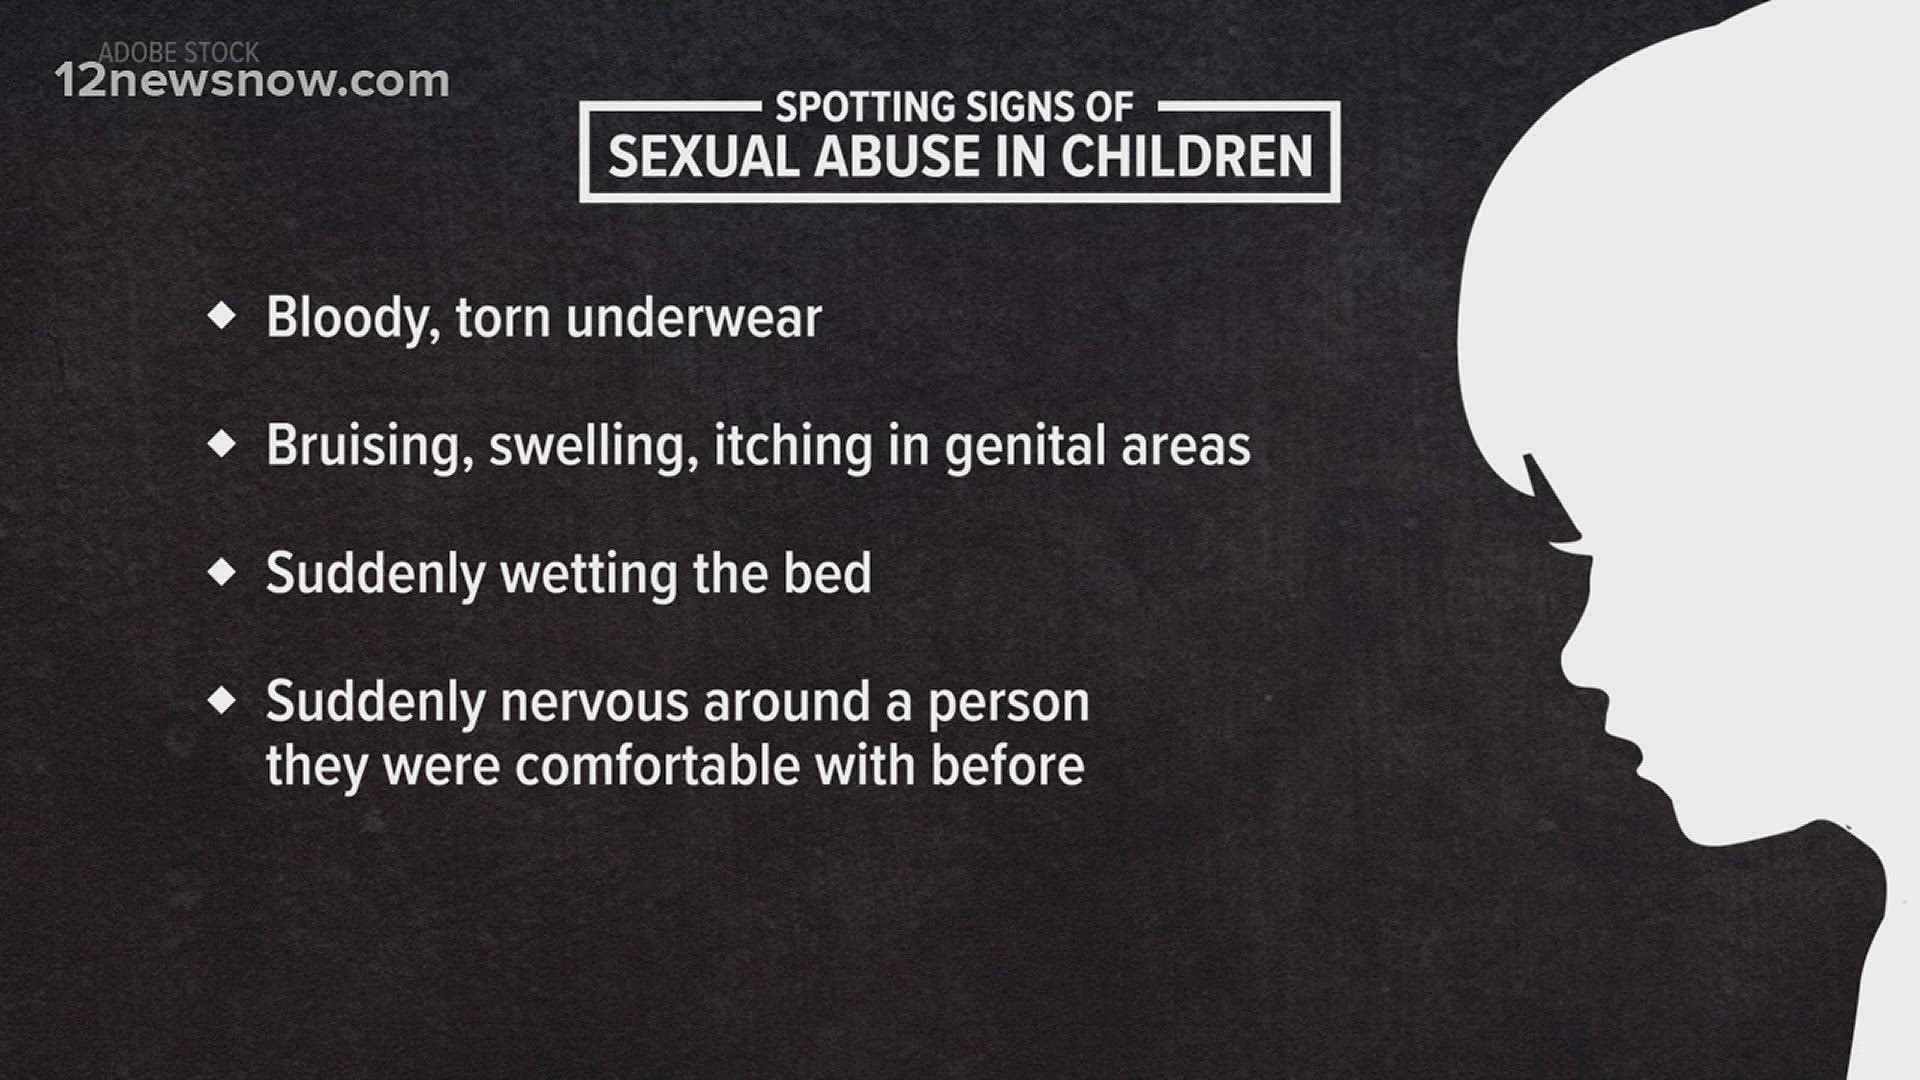 Daughter Sleepassault Videos - Experts share tips on how to spot sexual abuse in children | 12newsnow.com